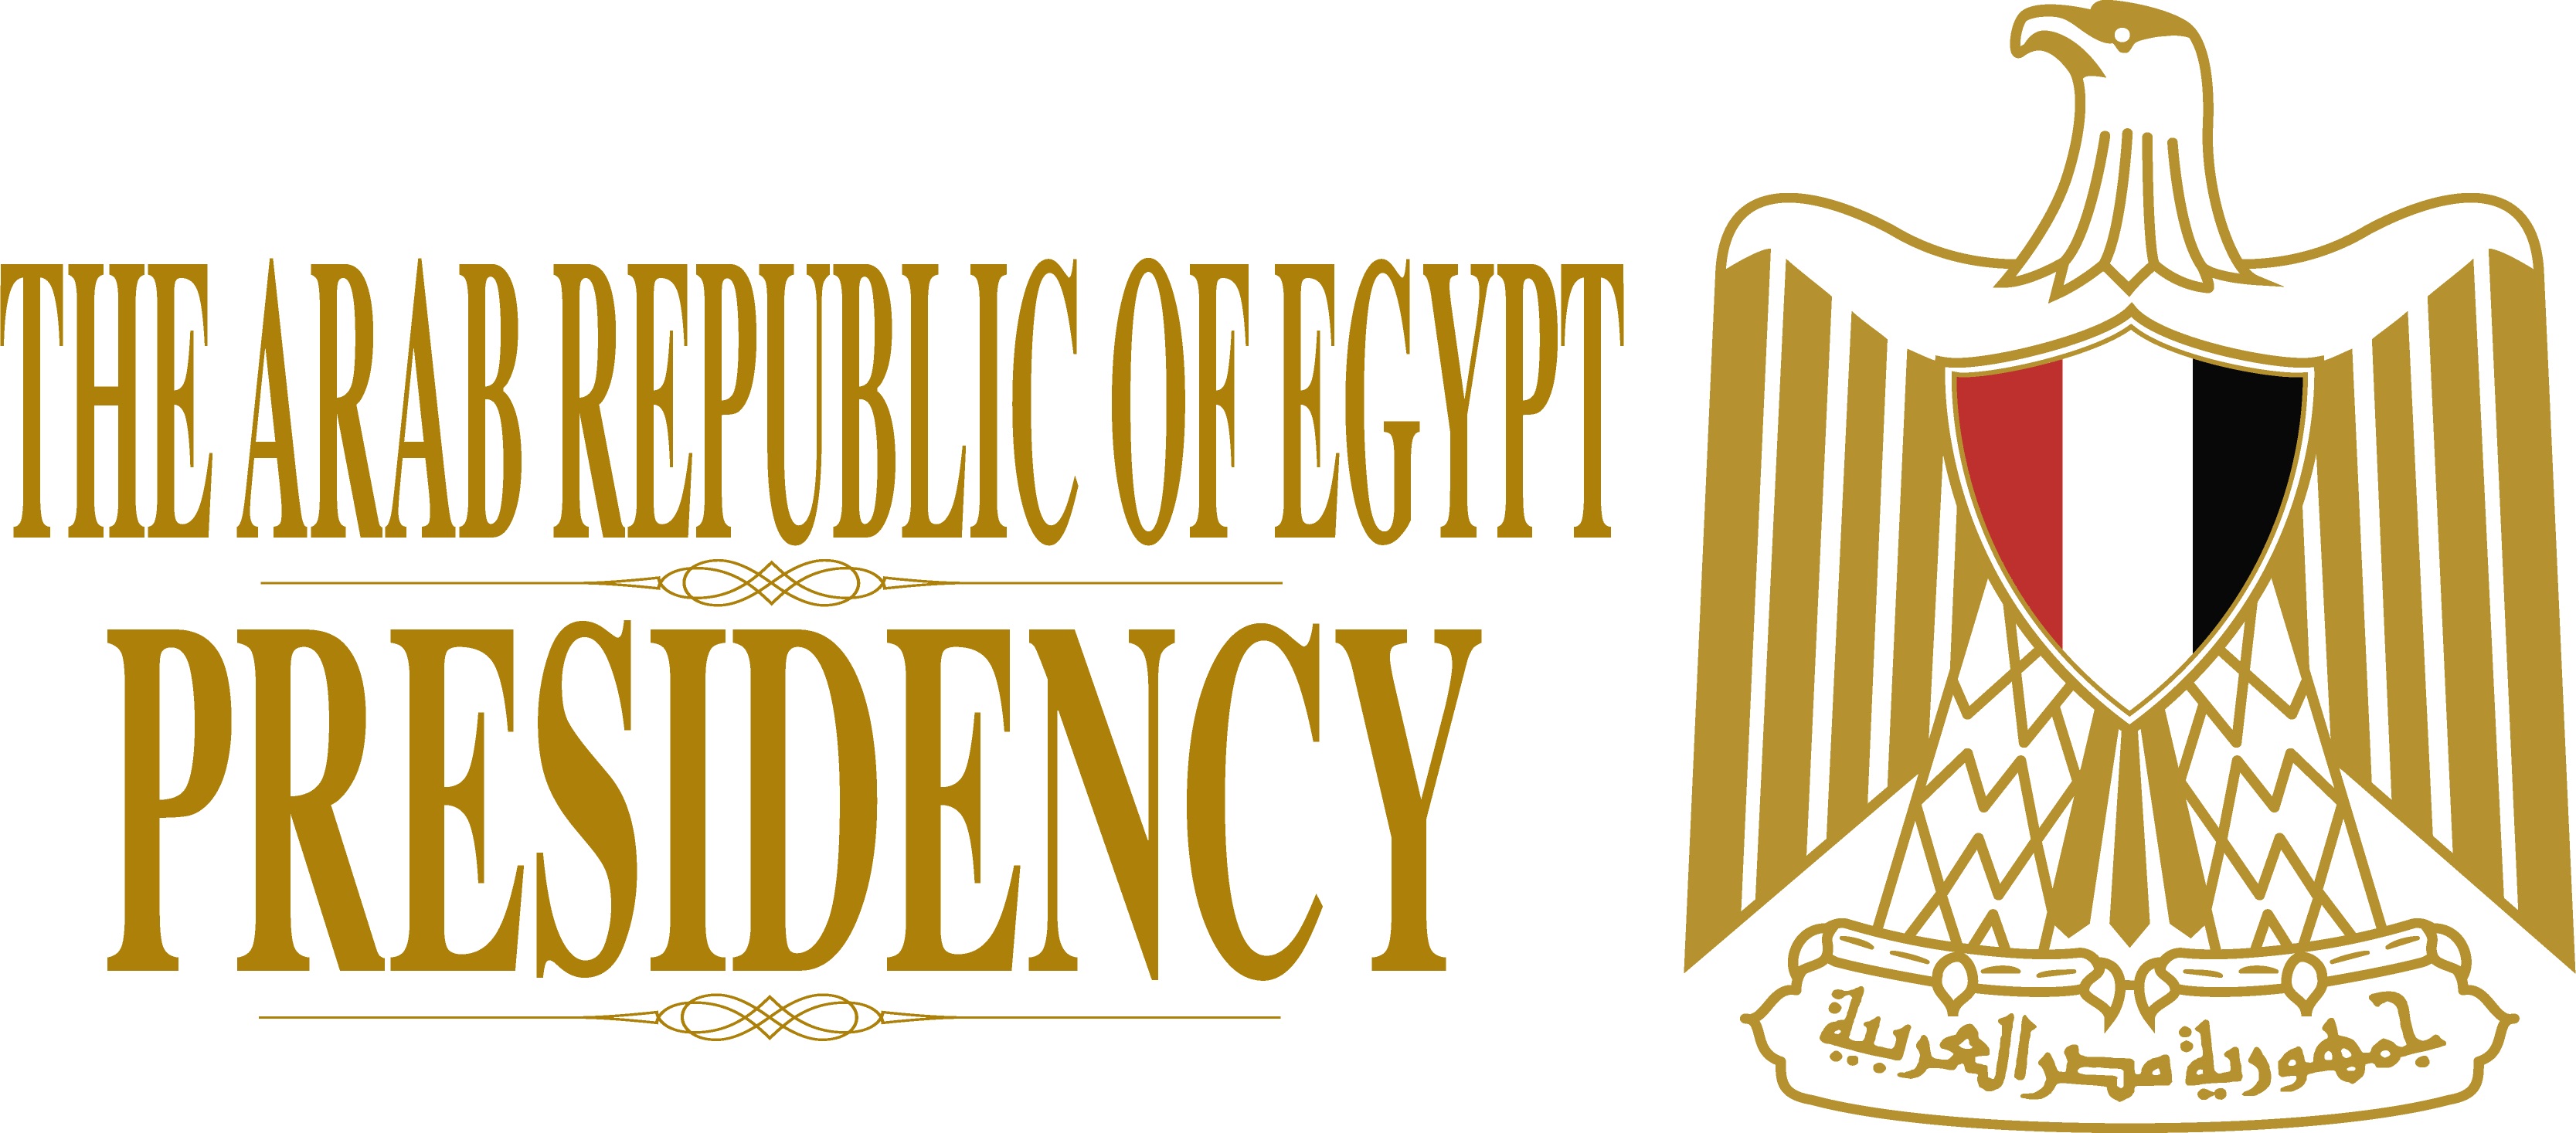 Egypt: President El-Sisi Witnesses Swearing-in of New Heads of Judicial Institutions and Authorities